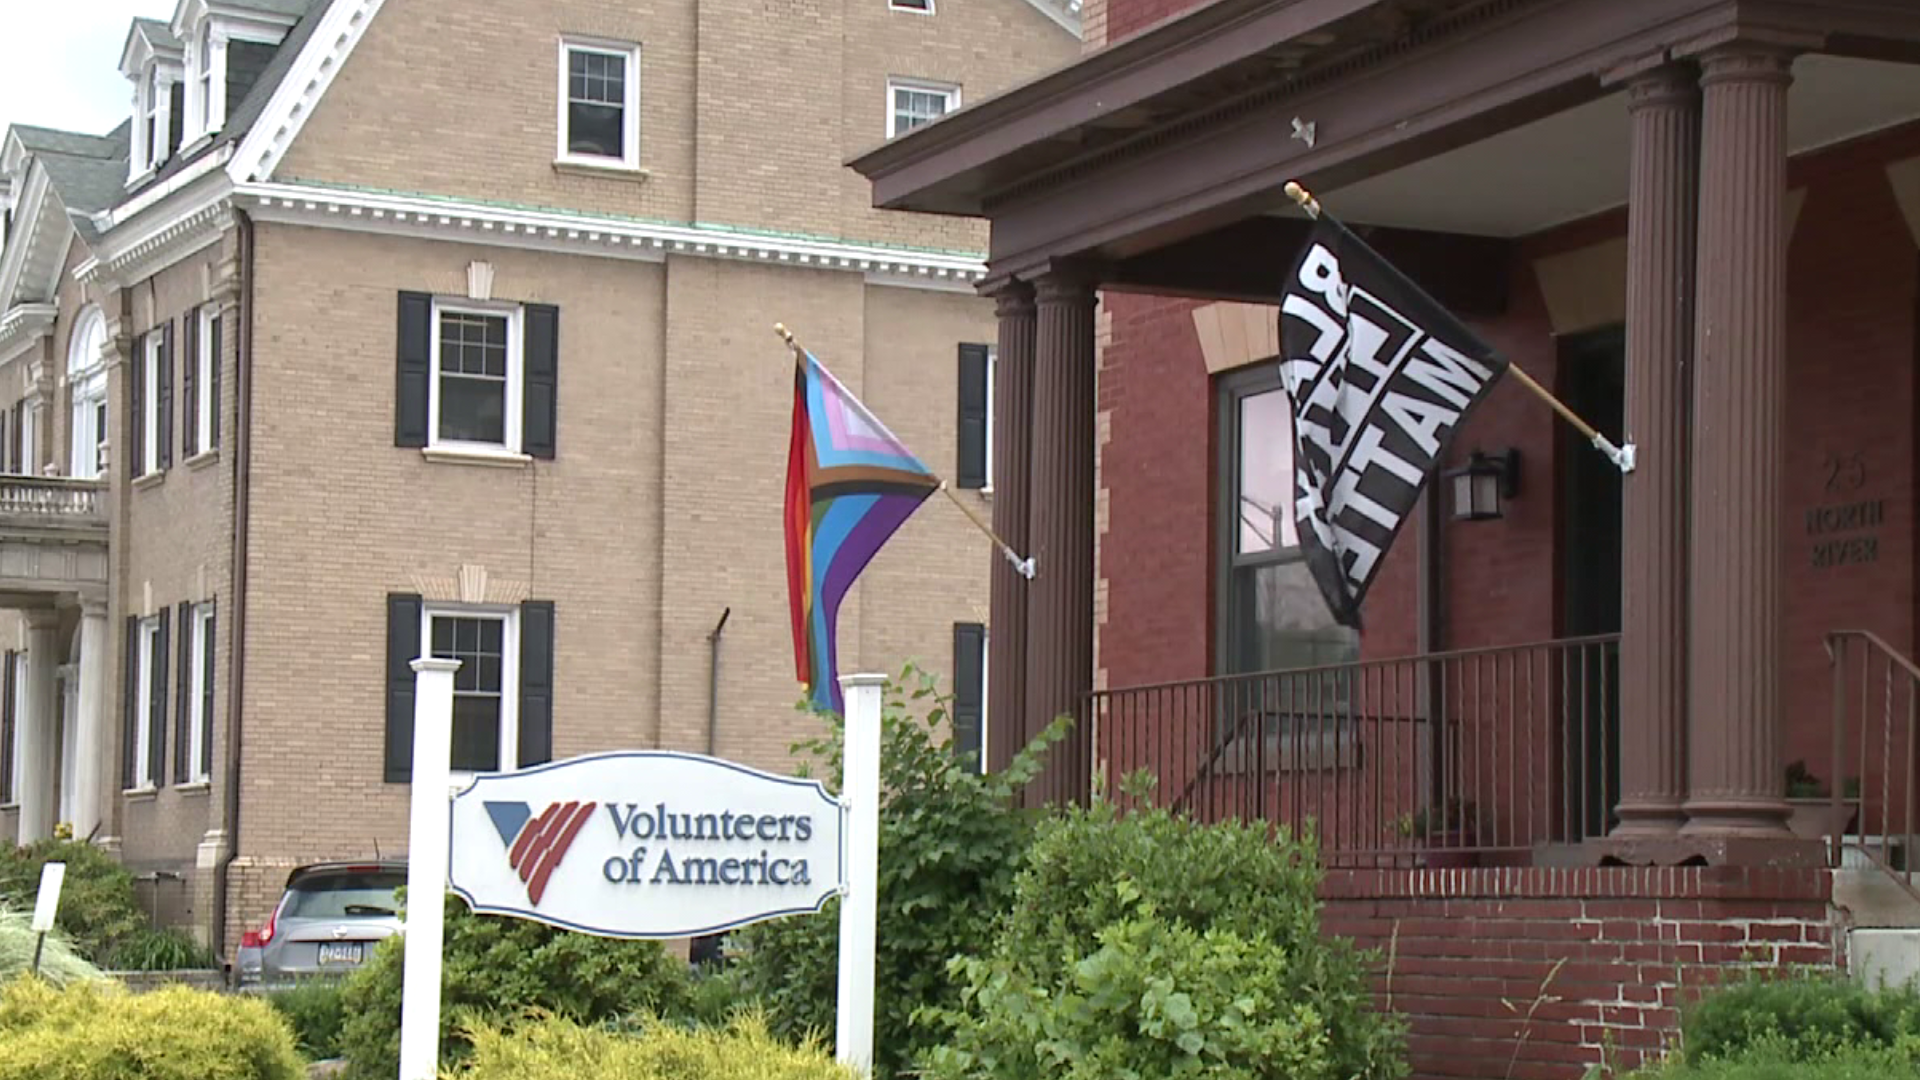 A non-profit in Luzerne County says it has been receiving hate online and in-person because of the flags hanging outside its office in Wilkes-Barre.